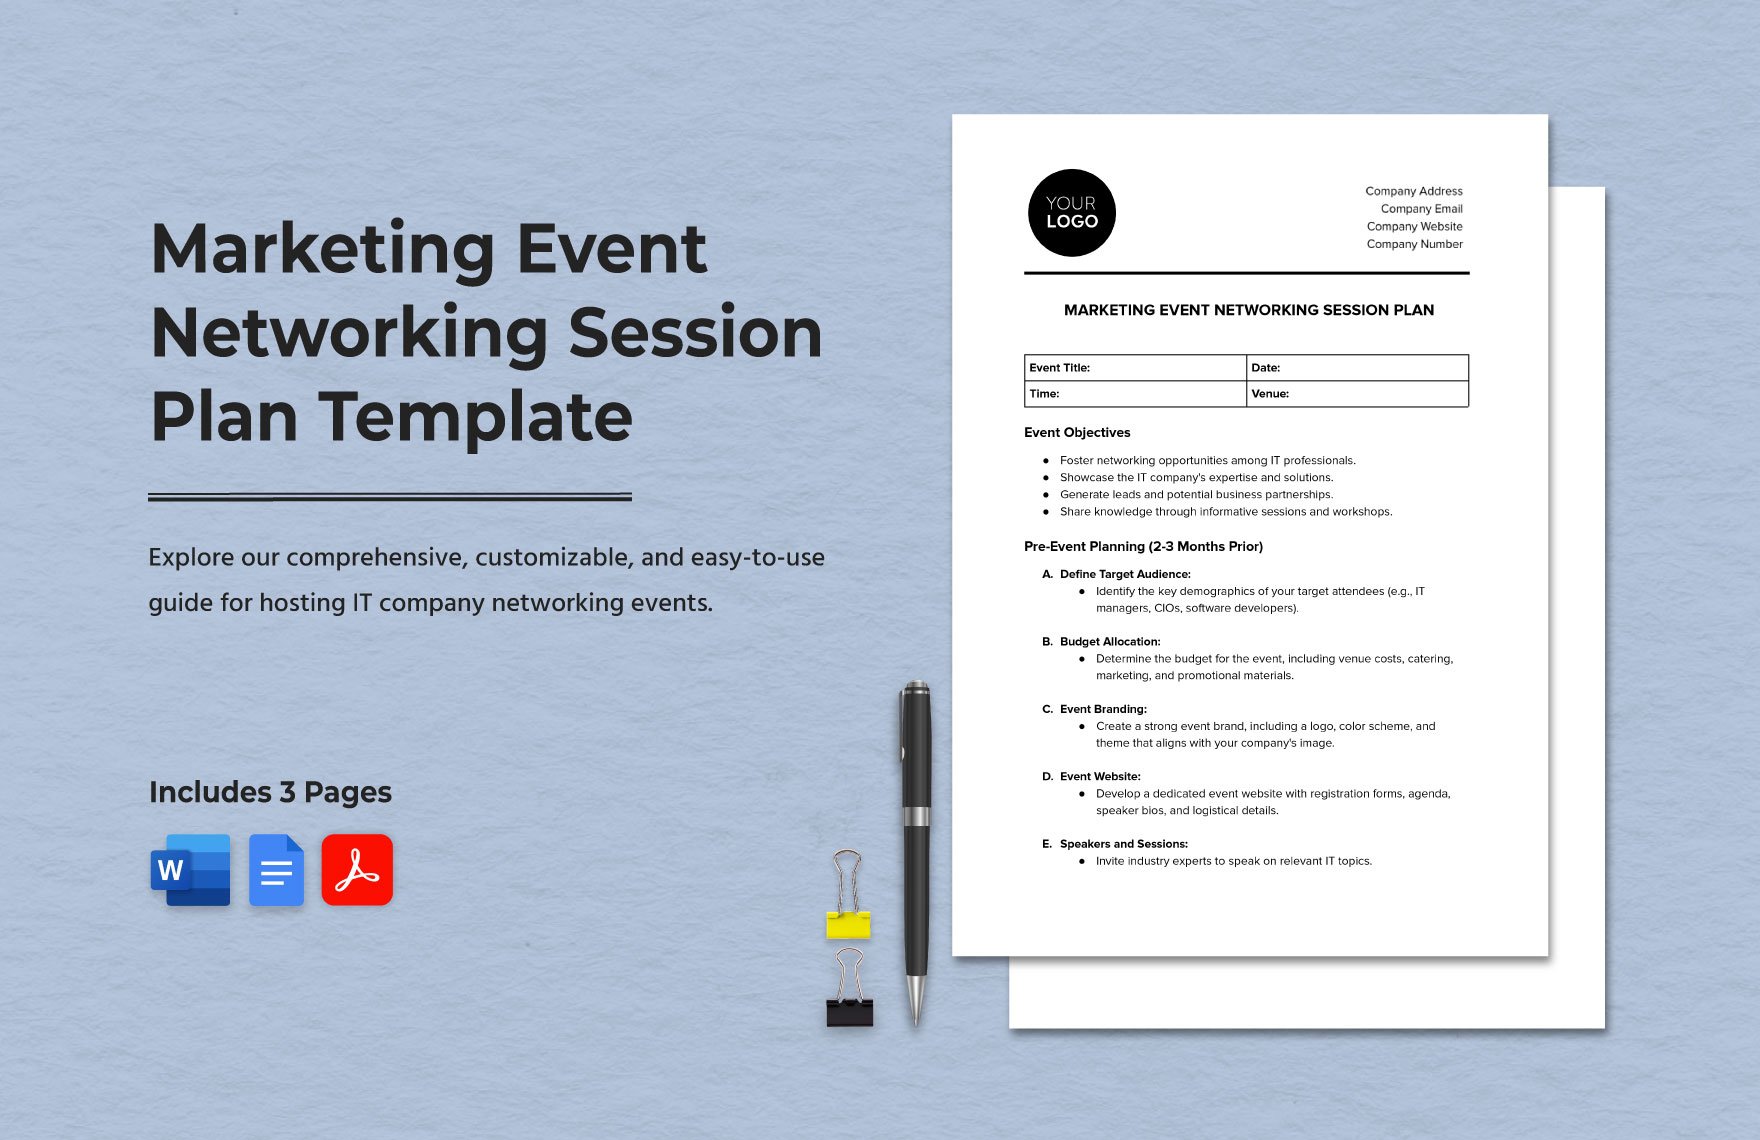 Marketing Event Networking Session Plan Template in Word, Google Docs, PDF